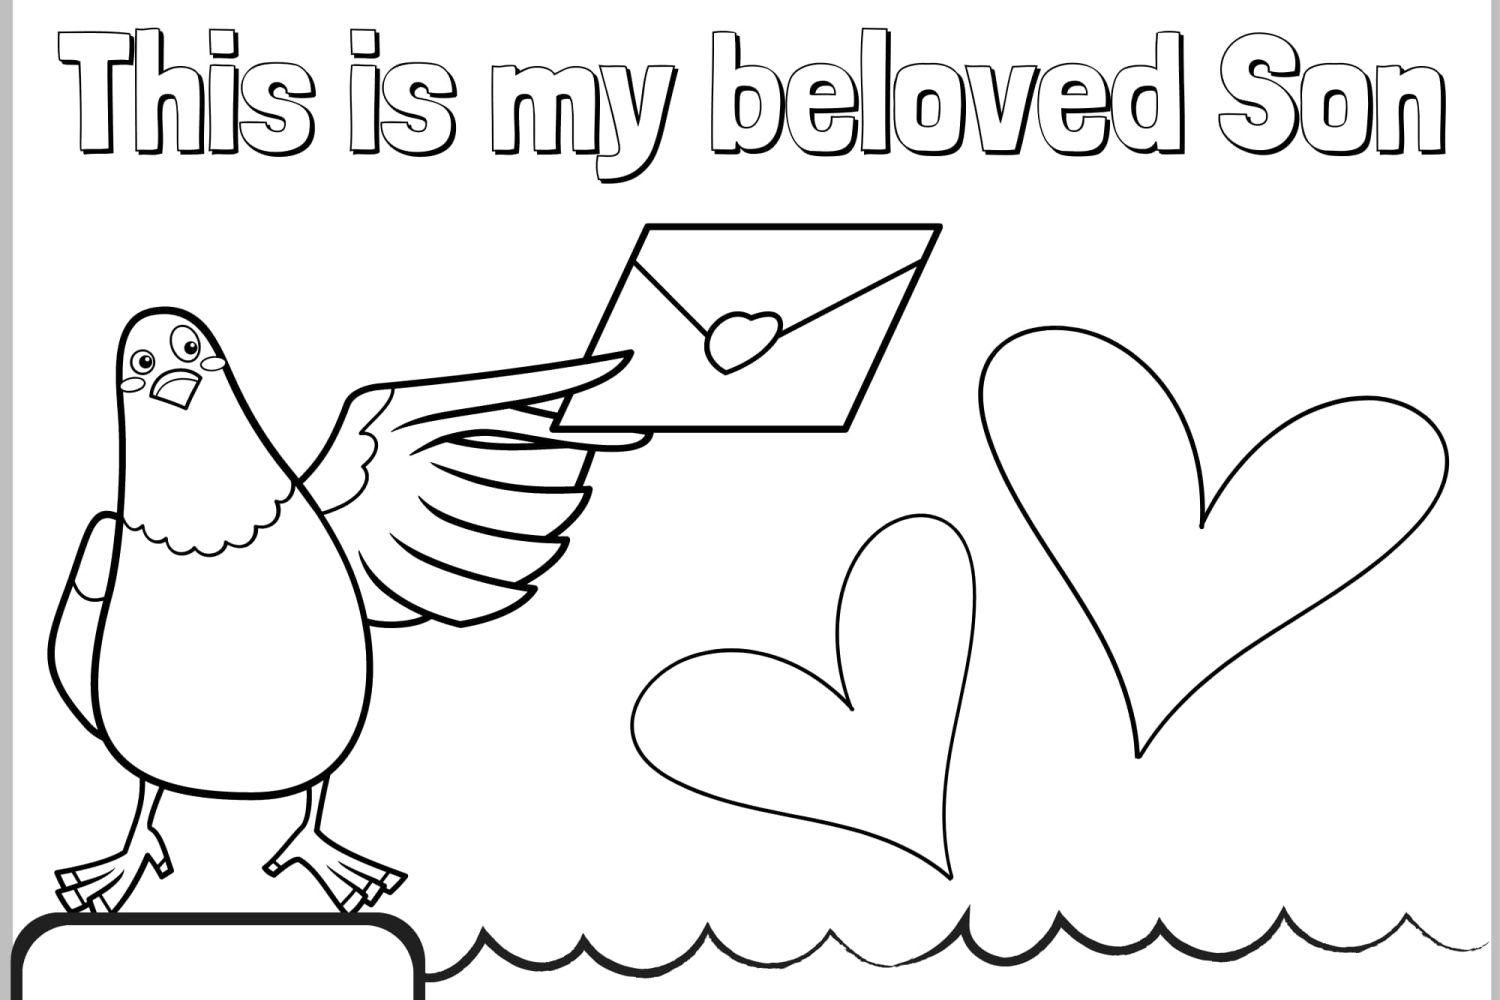 Colouring%20page%20-%20My%20beloved%20son-ce43538c Mark